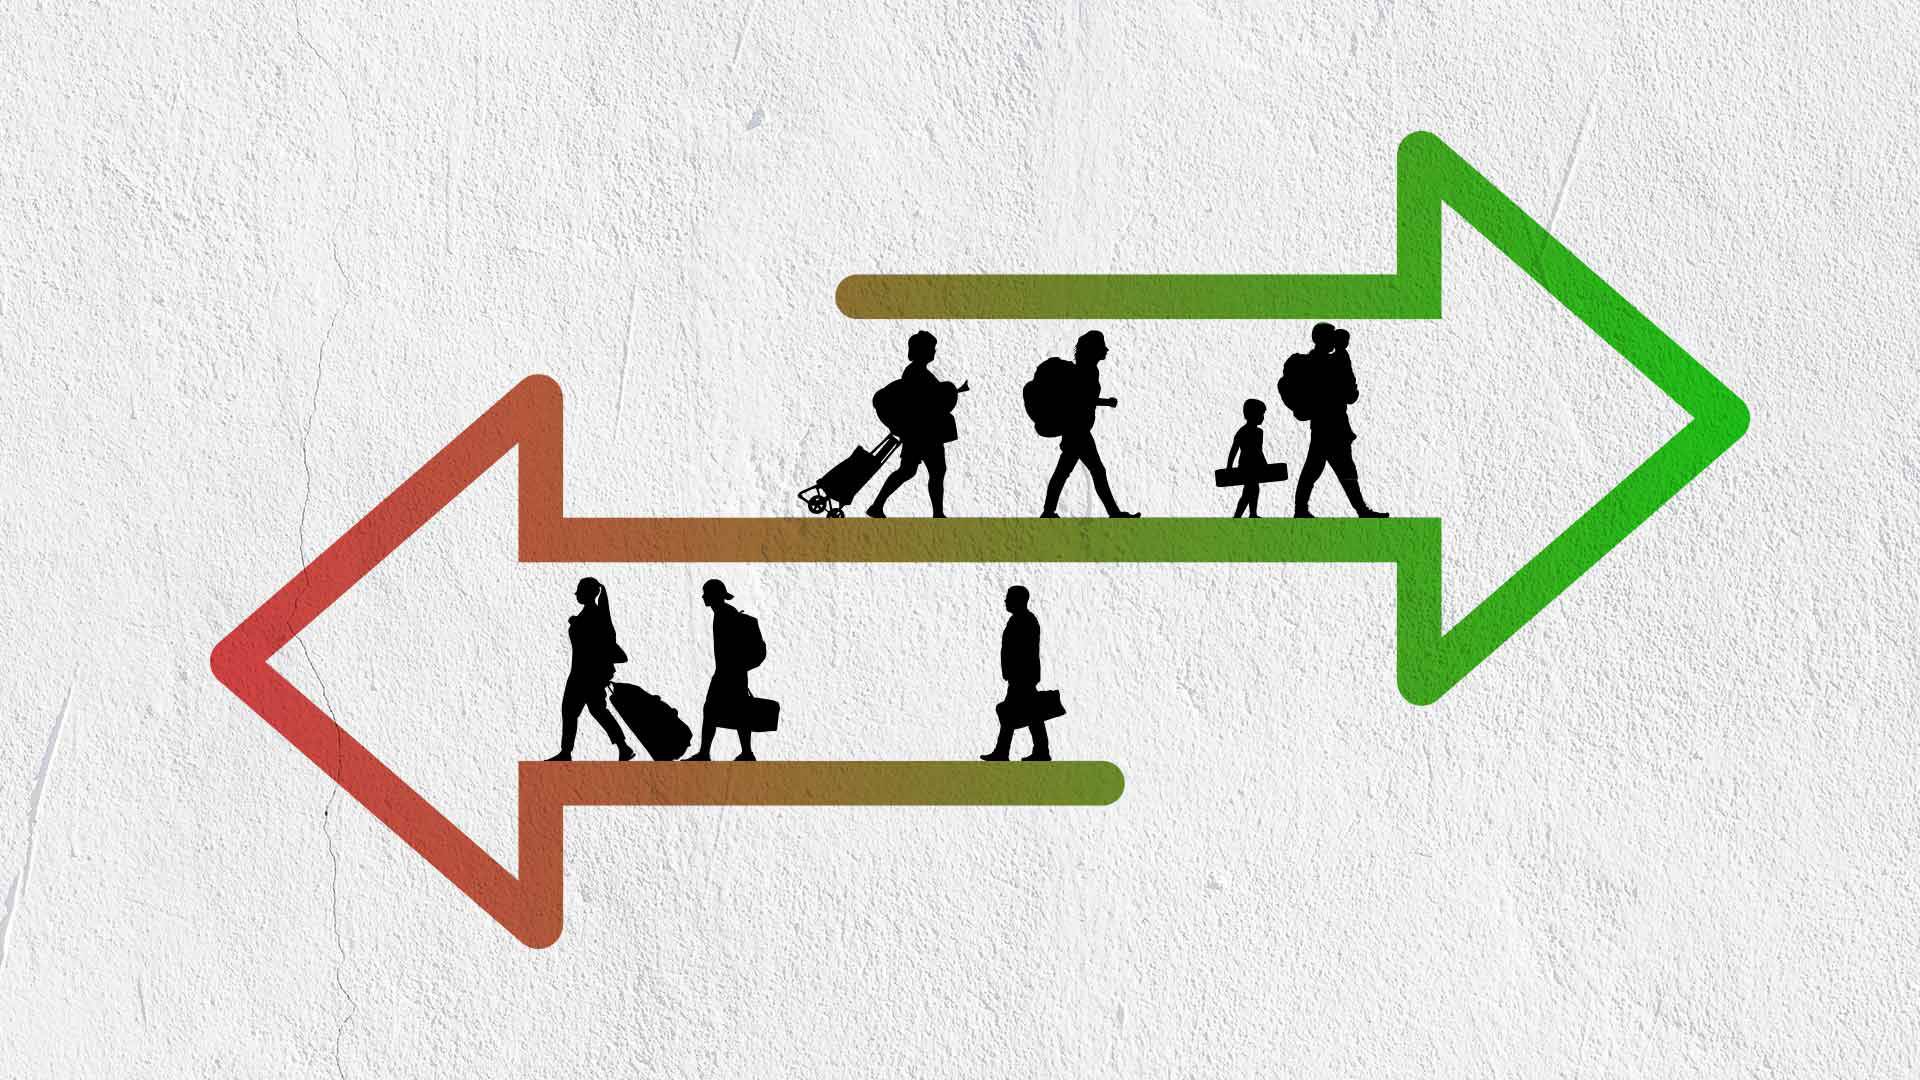 Illustration of 2 arrows going in different directions with silhouttes of people in them